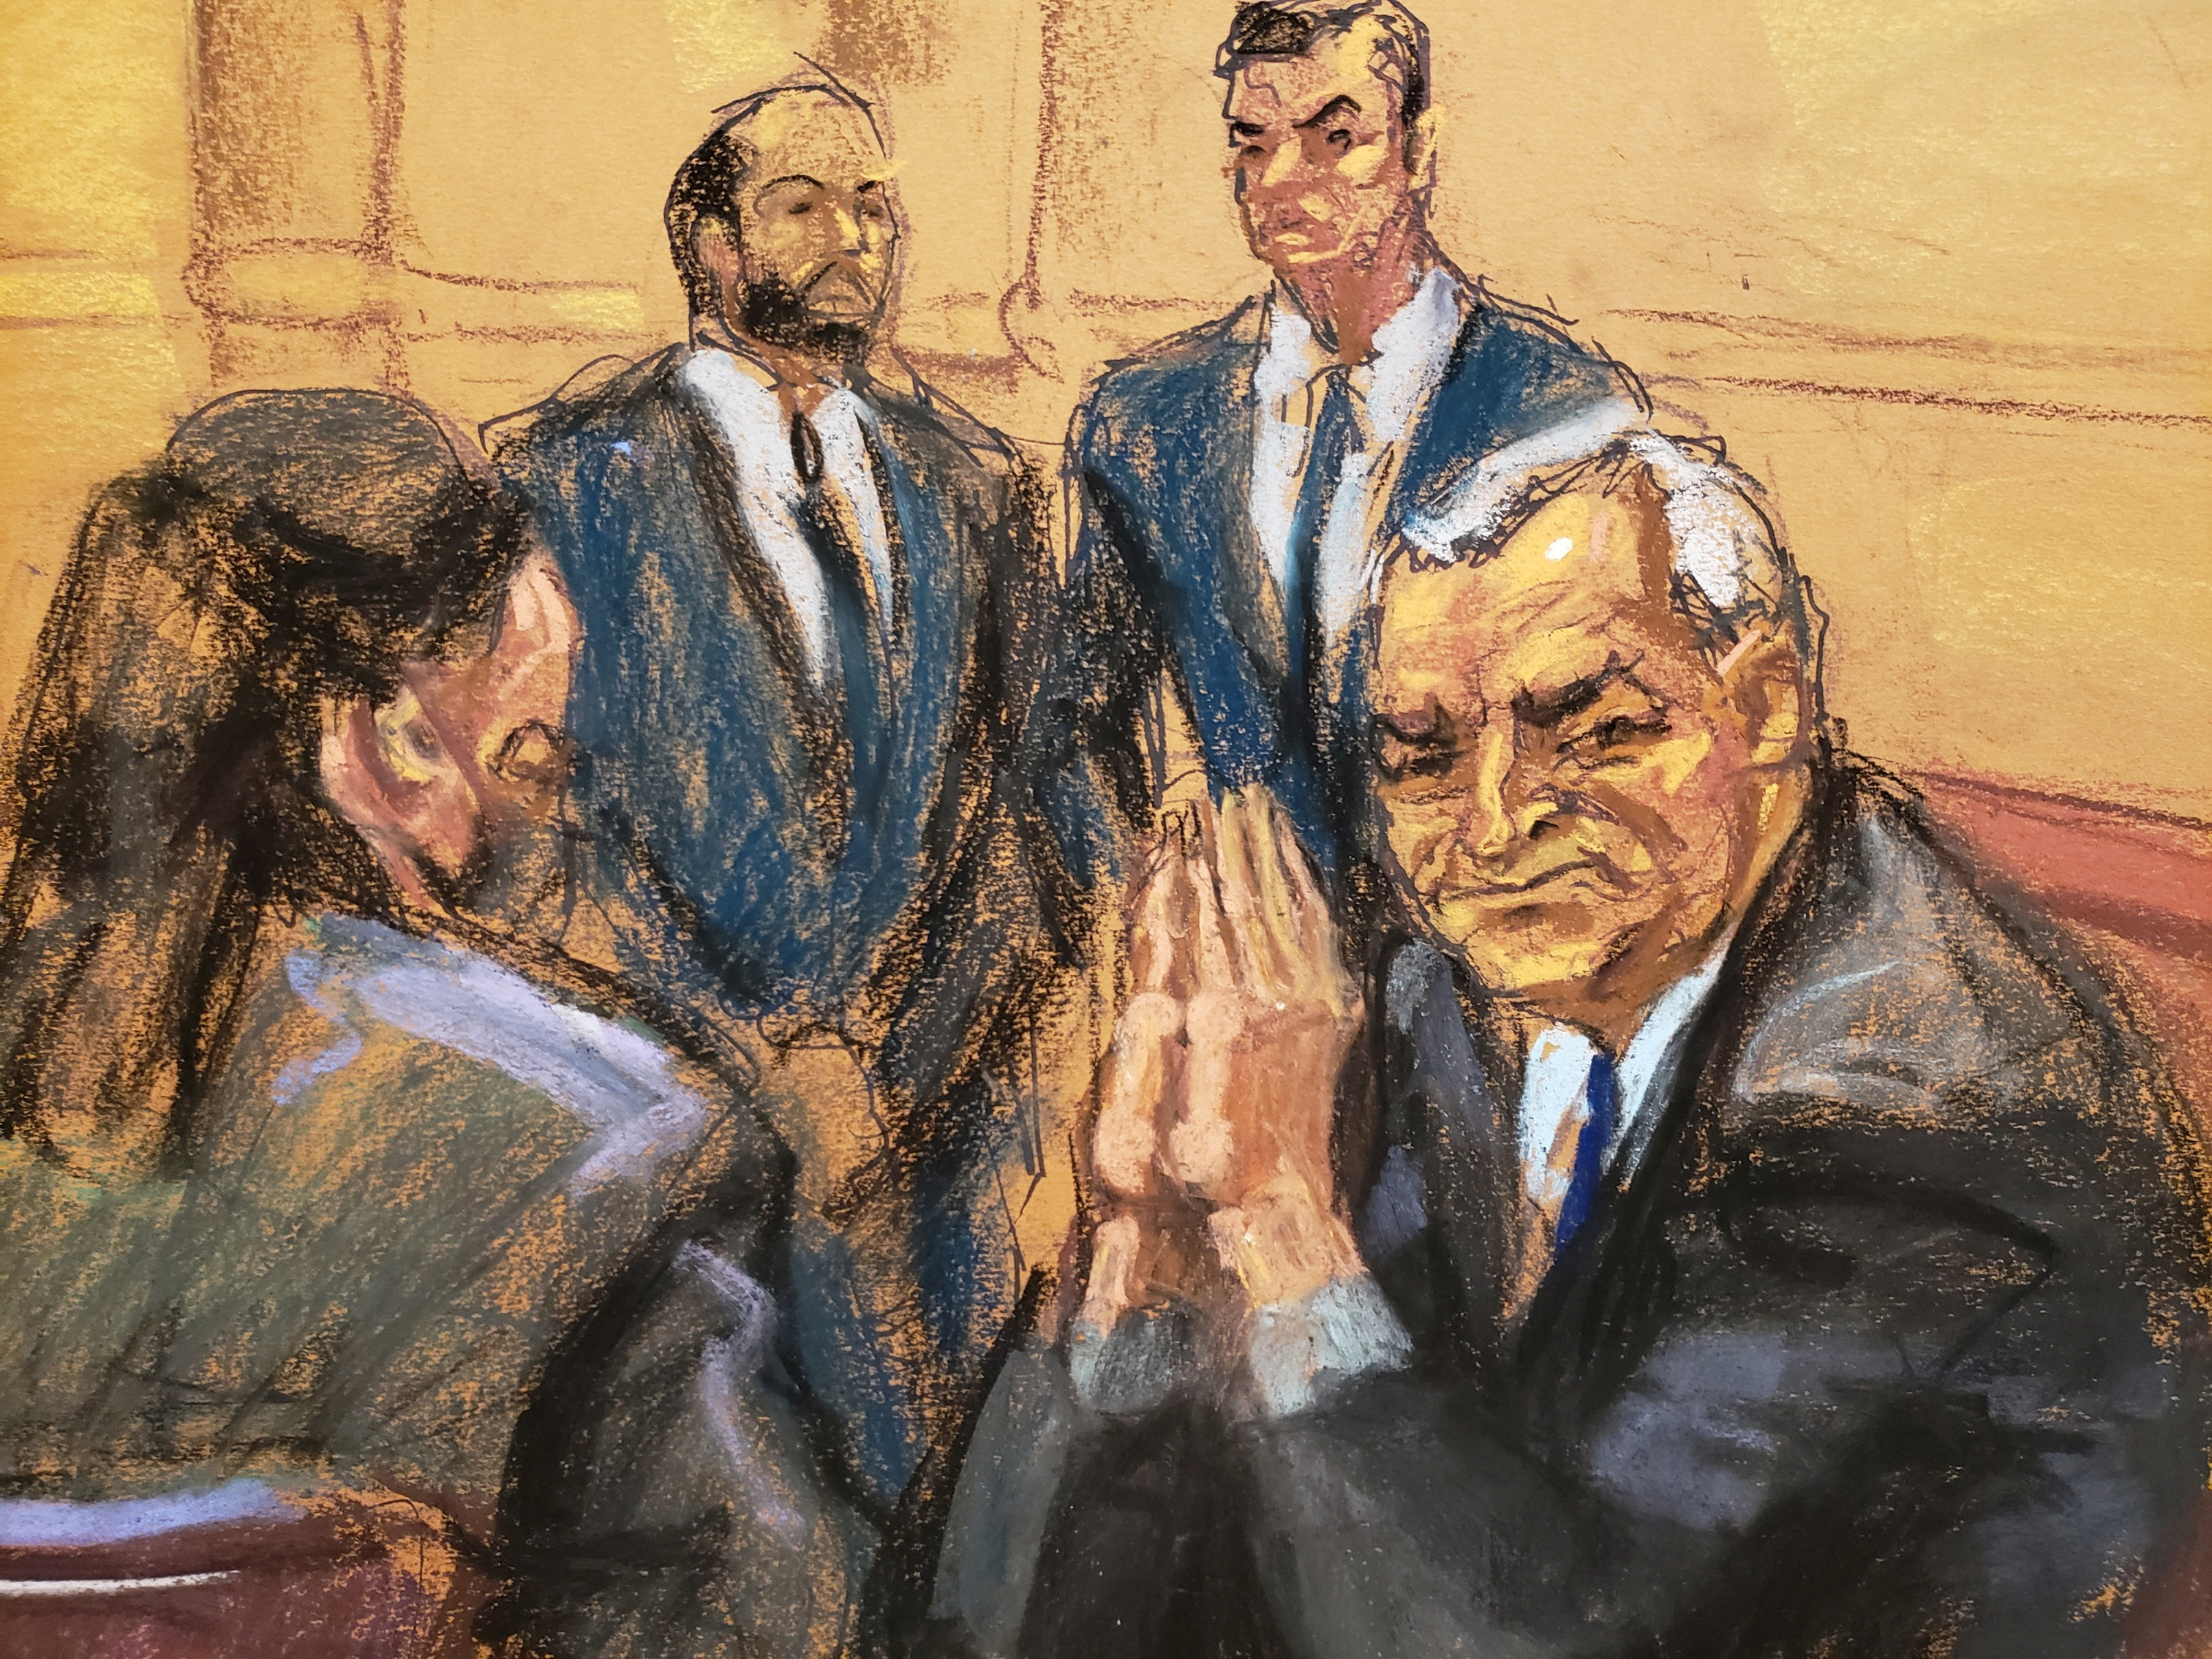 Mexico's former Public Security Minister Genaro Garcia Luna looks back at his wife seated in the audience during his trial on charges that he accepted millions of dollars to protect the powerful Sinaloa Cartel, once run by imprisoned drug lord Joaquin "El Chapo" Guzman, at a courthouse in New York City, U.S., January 30, 2023 in this courtroom sketch. REUTERS/Jane Rosenberg